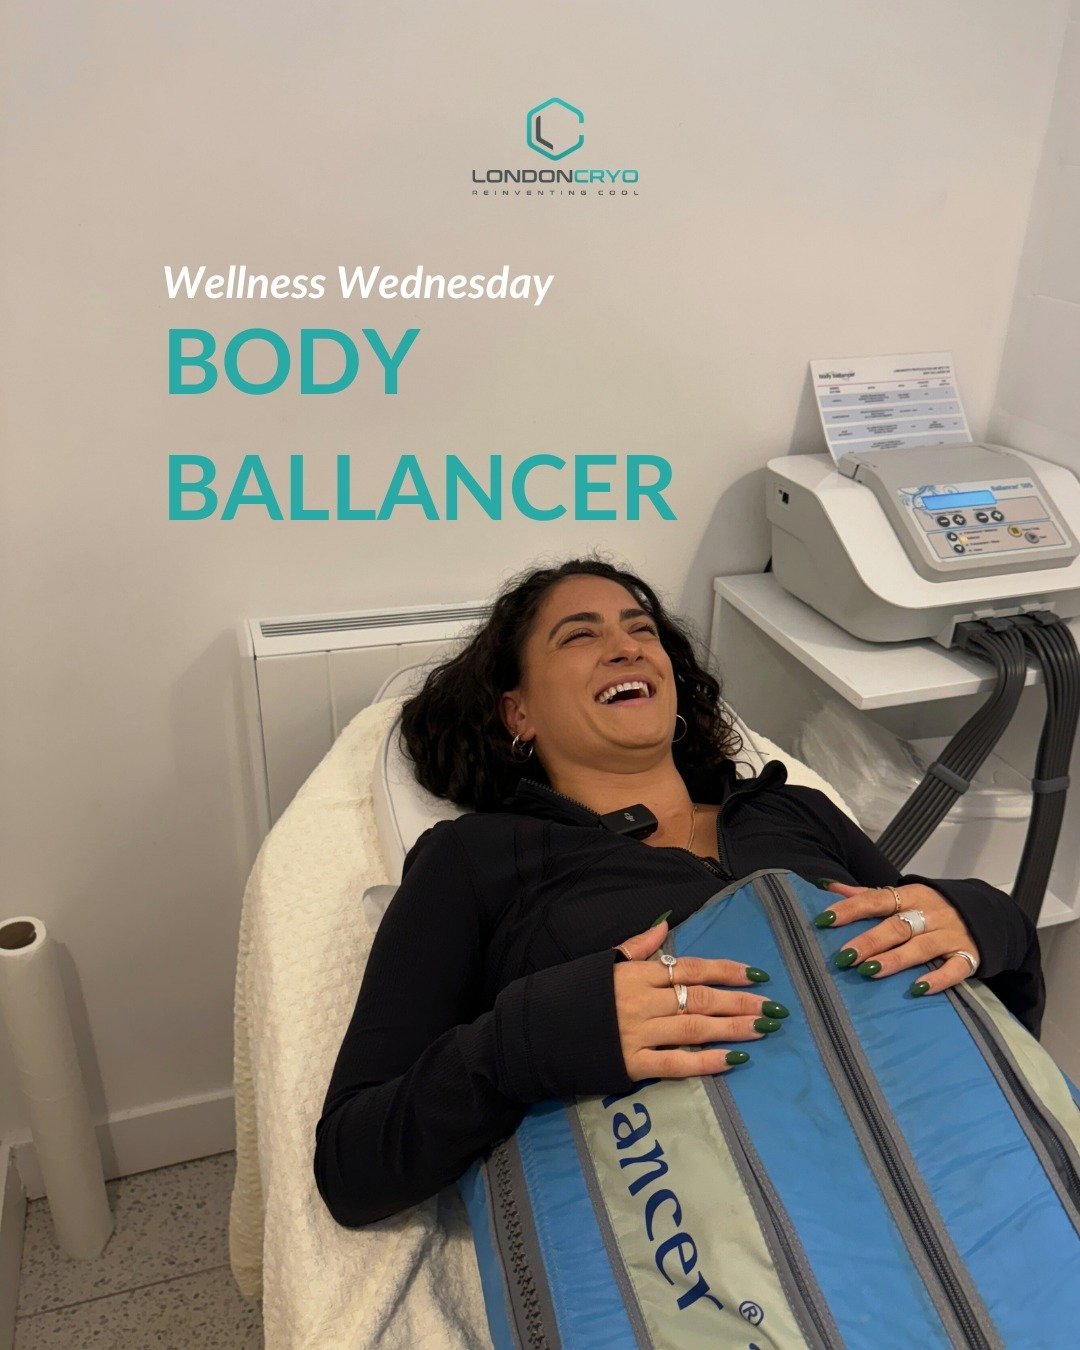 Discover the gentle power of a lymphatic drainage massage at LondonCryo! 🌟 ⁠
⁠
Reduce bloating and water retention, detoxify your body, and boost your well-being with this specialised therapy. With this months offer, combine with an Infrared sauna t